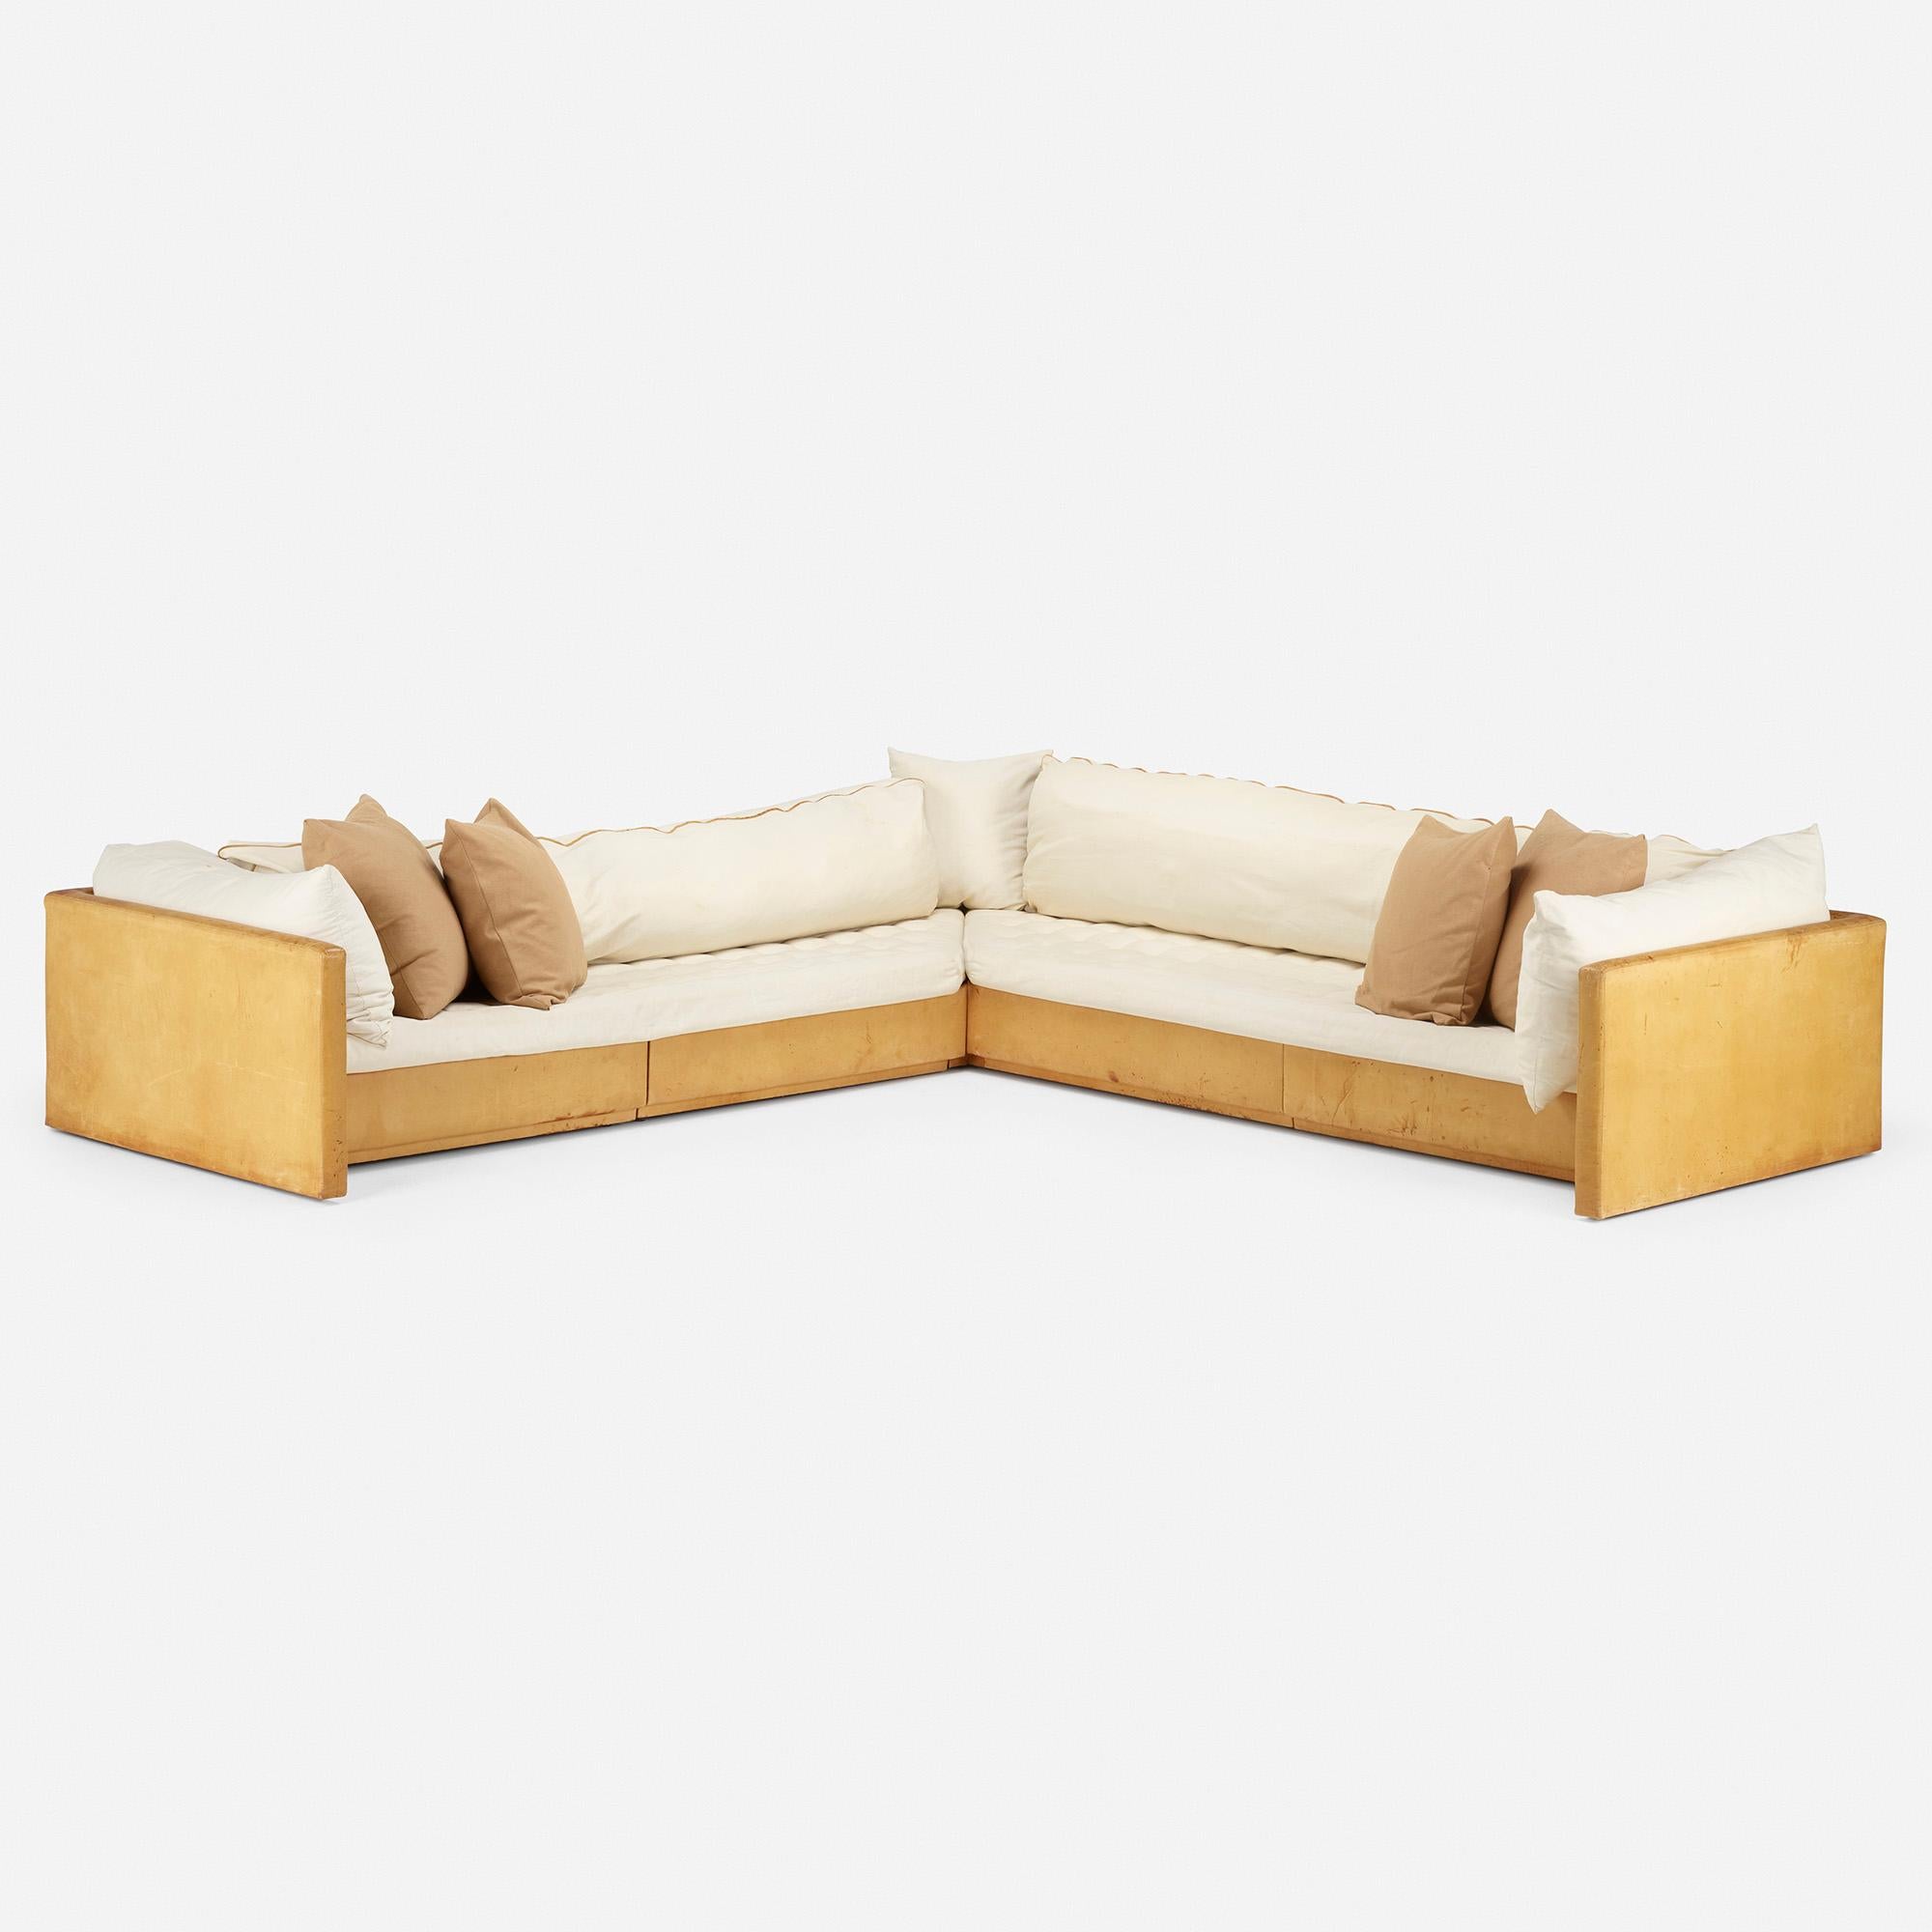 Made by: Knoll, USA, circa 1985

Material: leather, canvas upholstery

Size: 133 W × 133 D × 25 H in seat height 14 inches

Description: 'This D'Urso Sofa for Knoll is a custom example specified by designer Joe D'Urso for an interior design